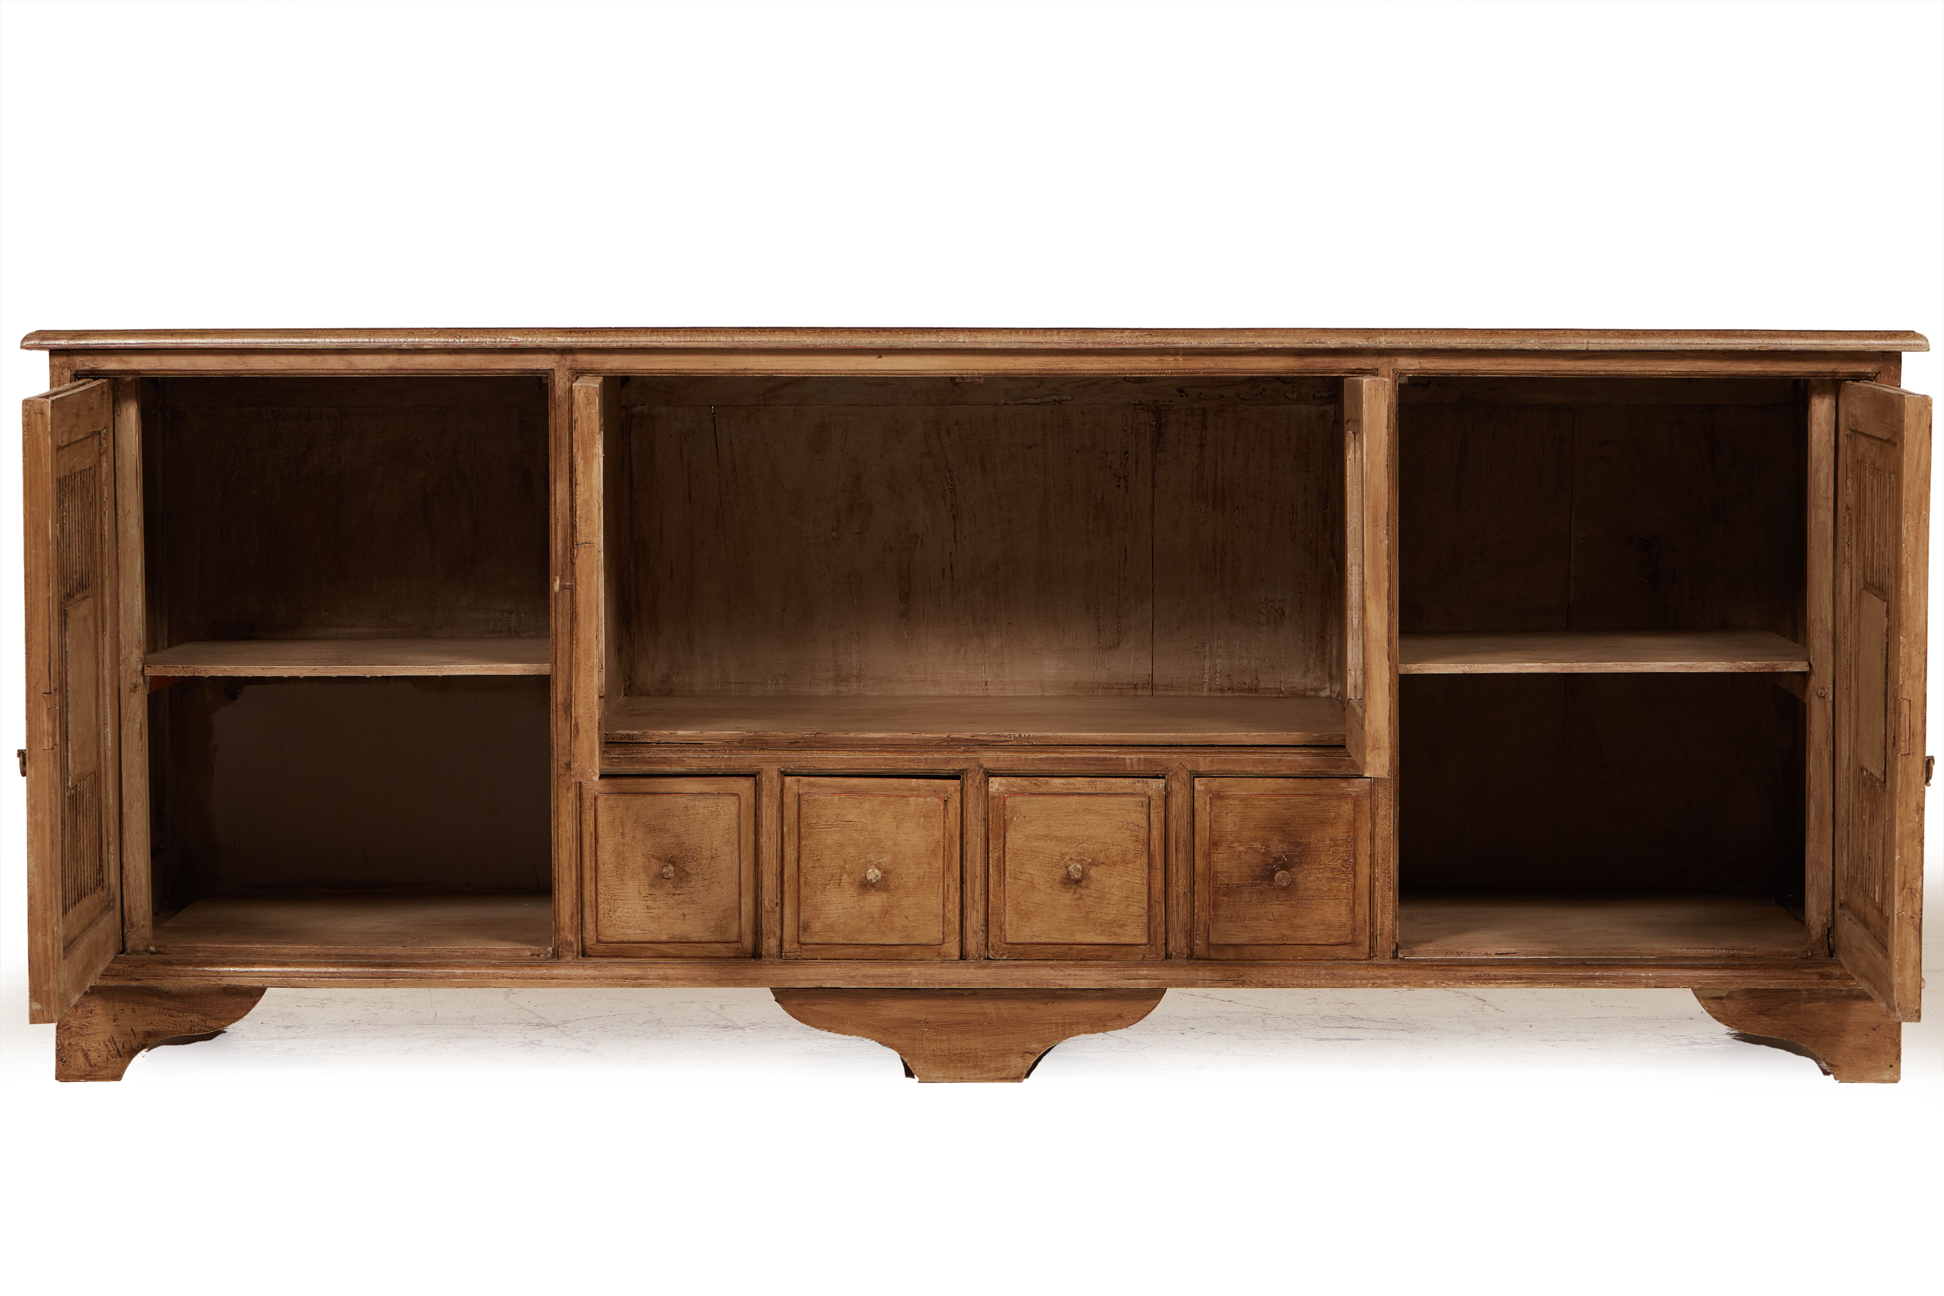 A LARGE RUSTIC SIDEBOARD - Image 3 of 3